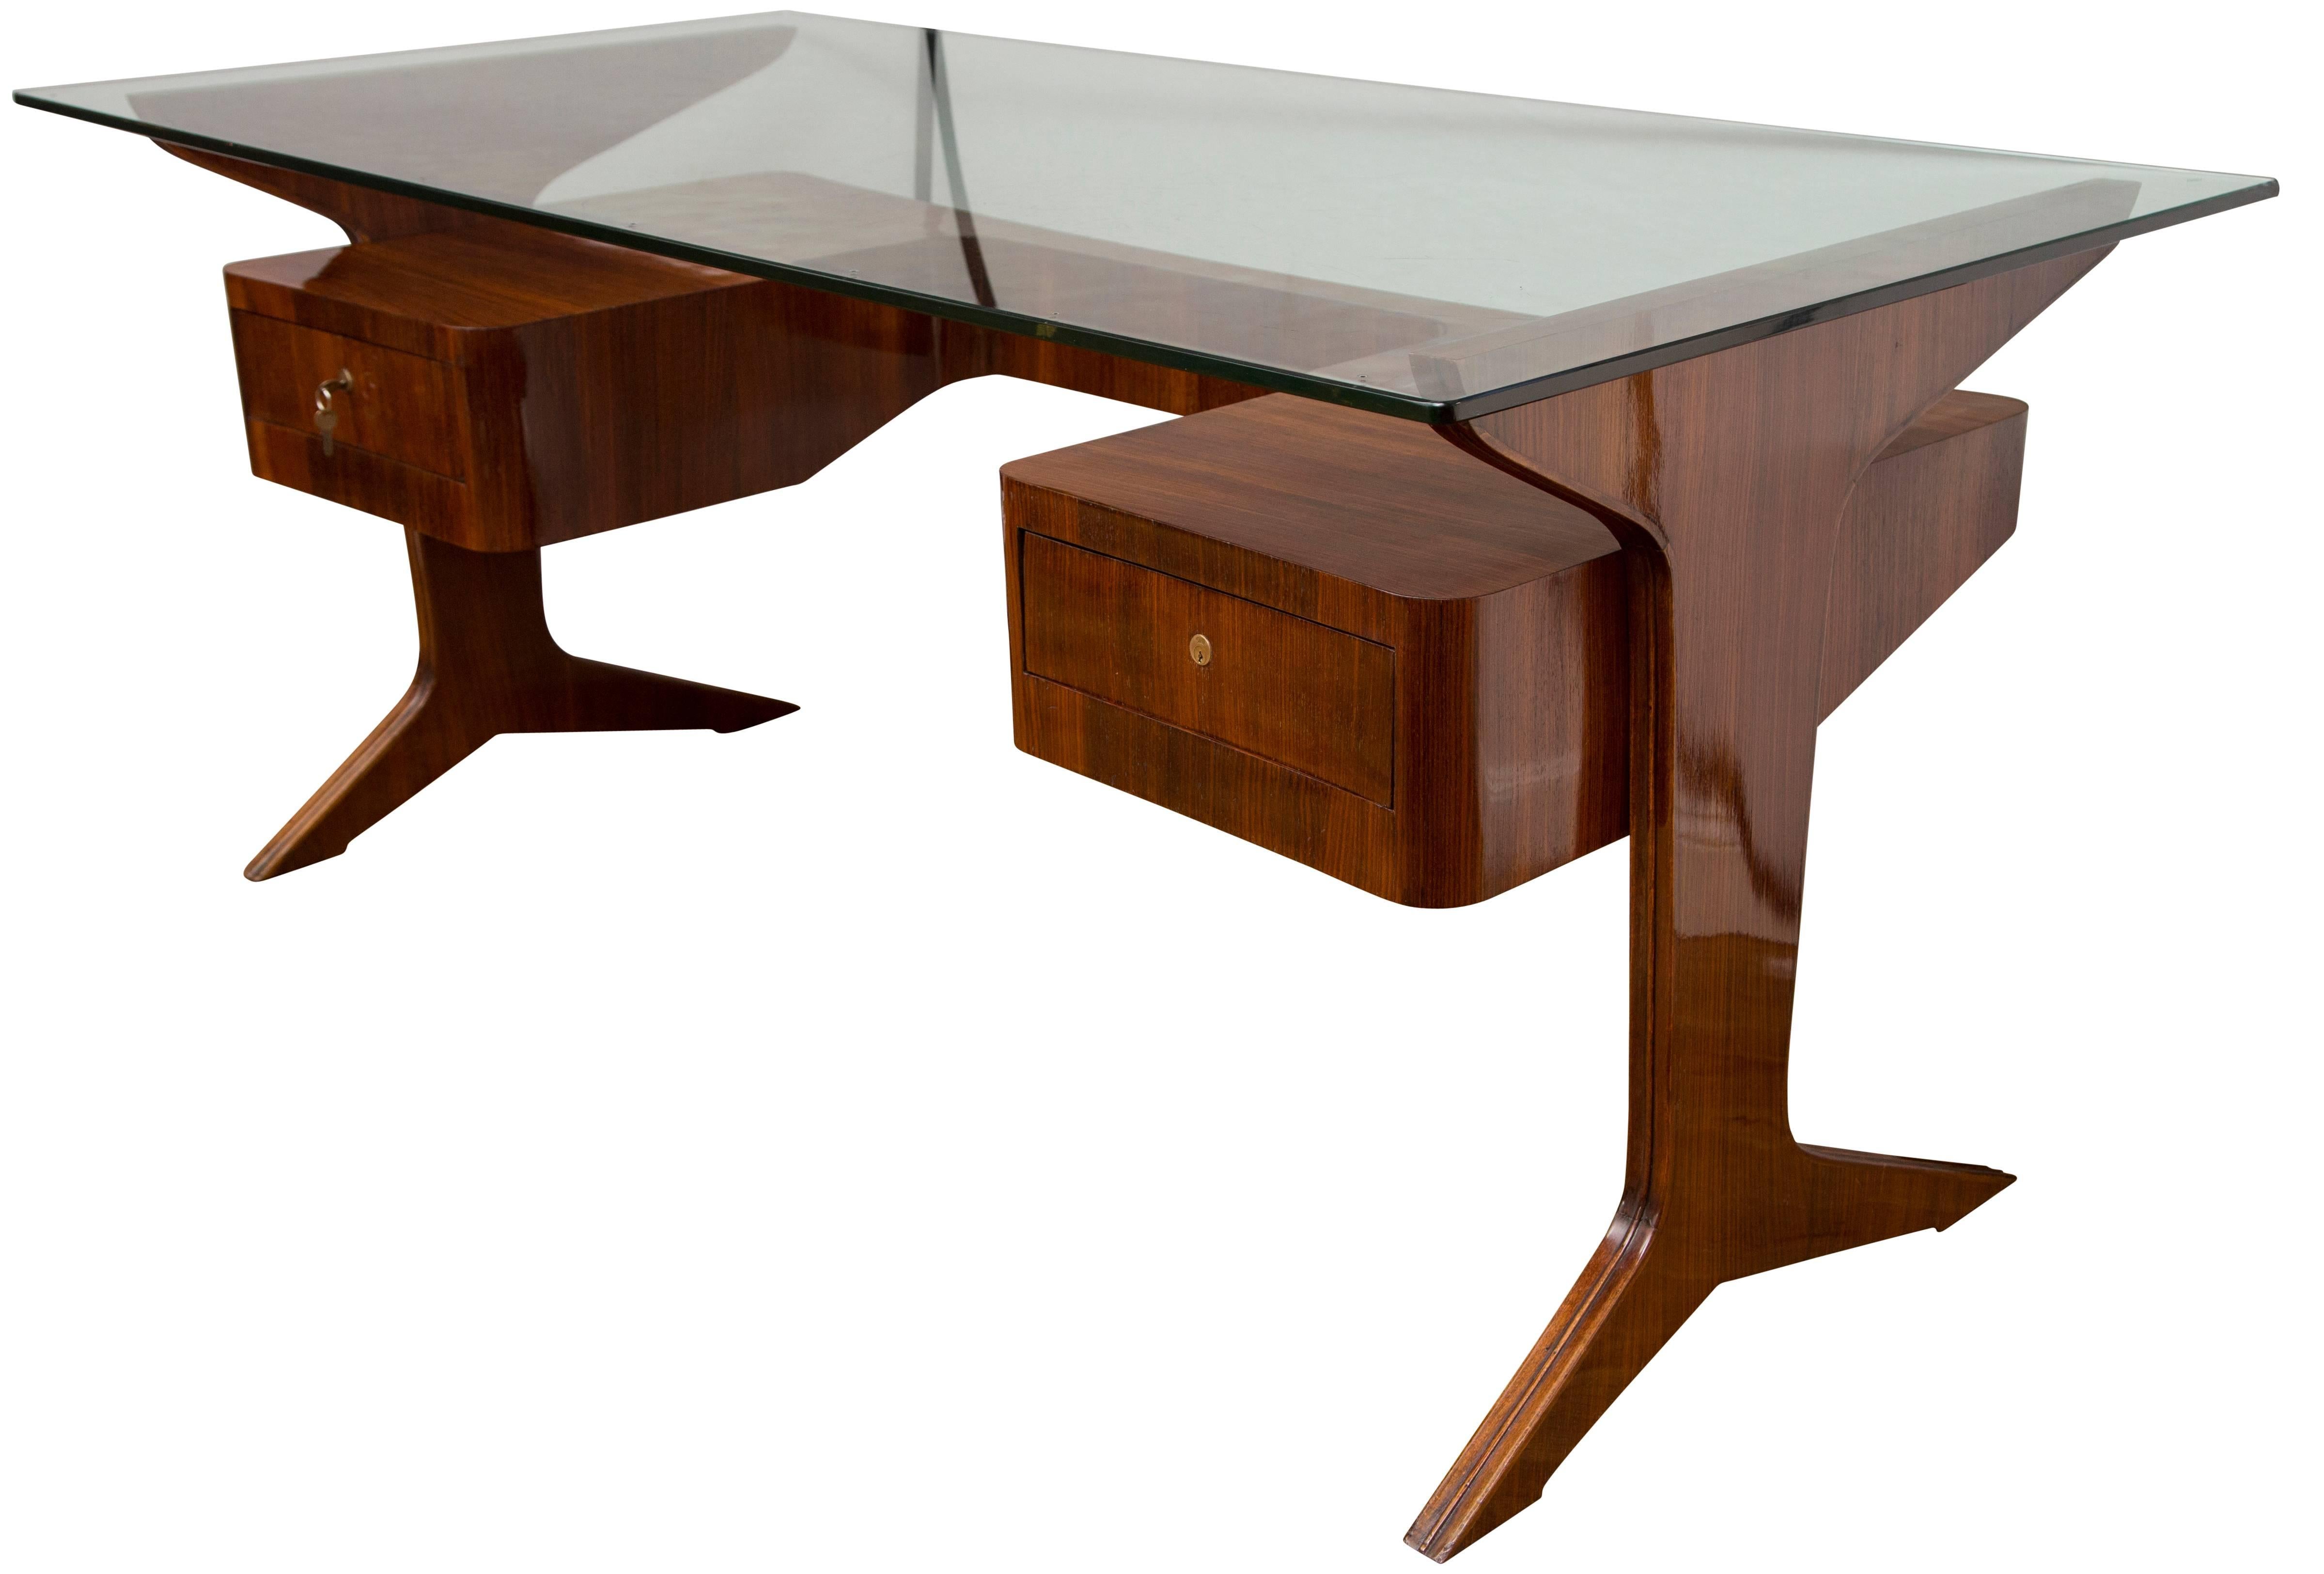 Fabulous vintage free floating desk with original glass blown top upheld by a sleek and clean rosewood two drawer table base, note the curved back.
Dating: 1958 ca
Origin: Italy
Condition: The wood veneer is in excellent condition, however the glass